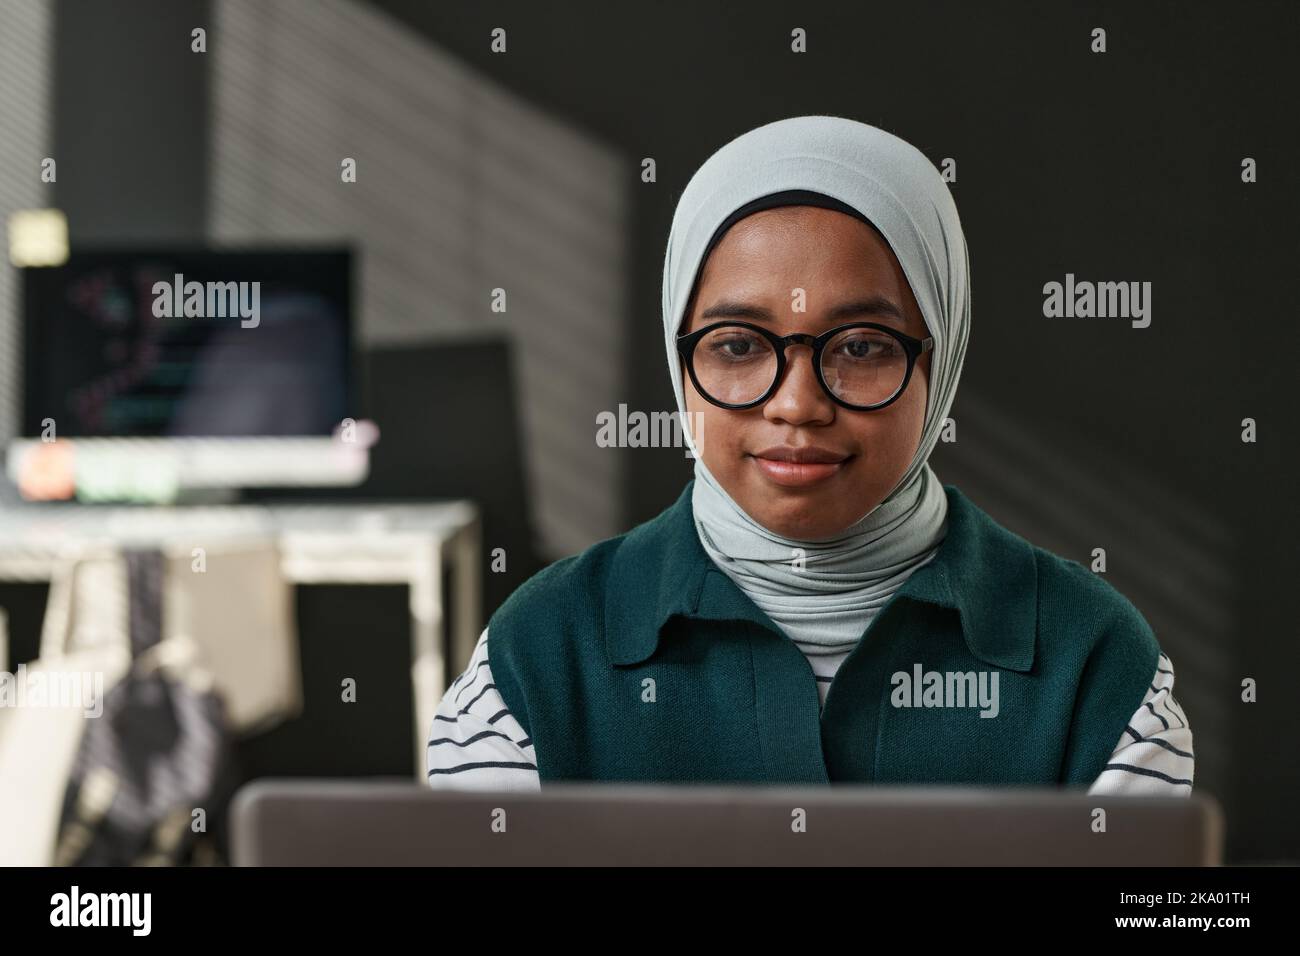 Young IT support engineer in casualwear, eyeglasses and hijab sitting in front of computer monitor and networking in office Stock Photo